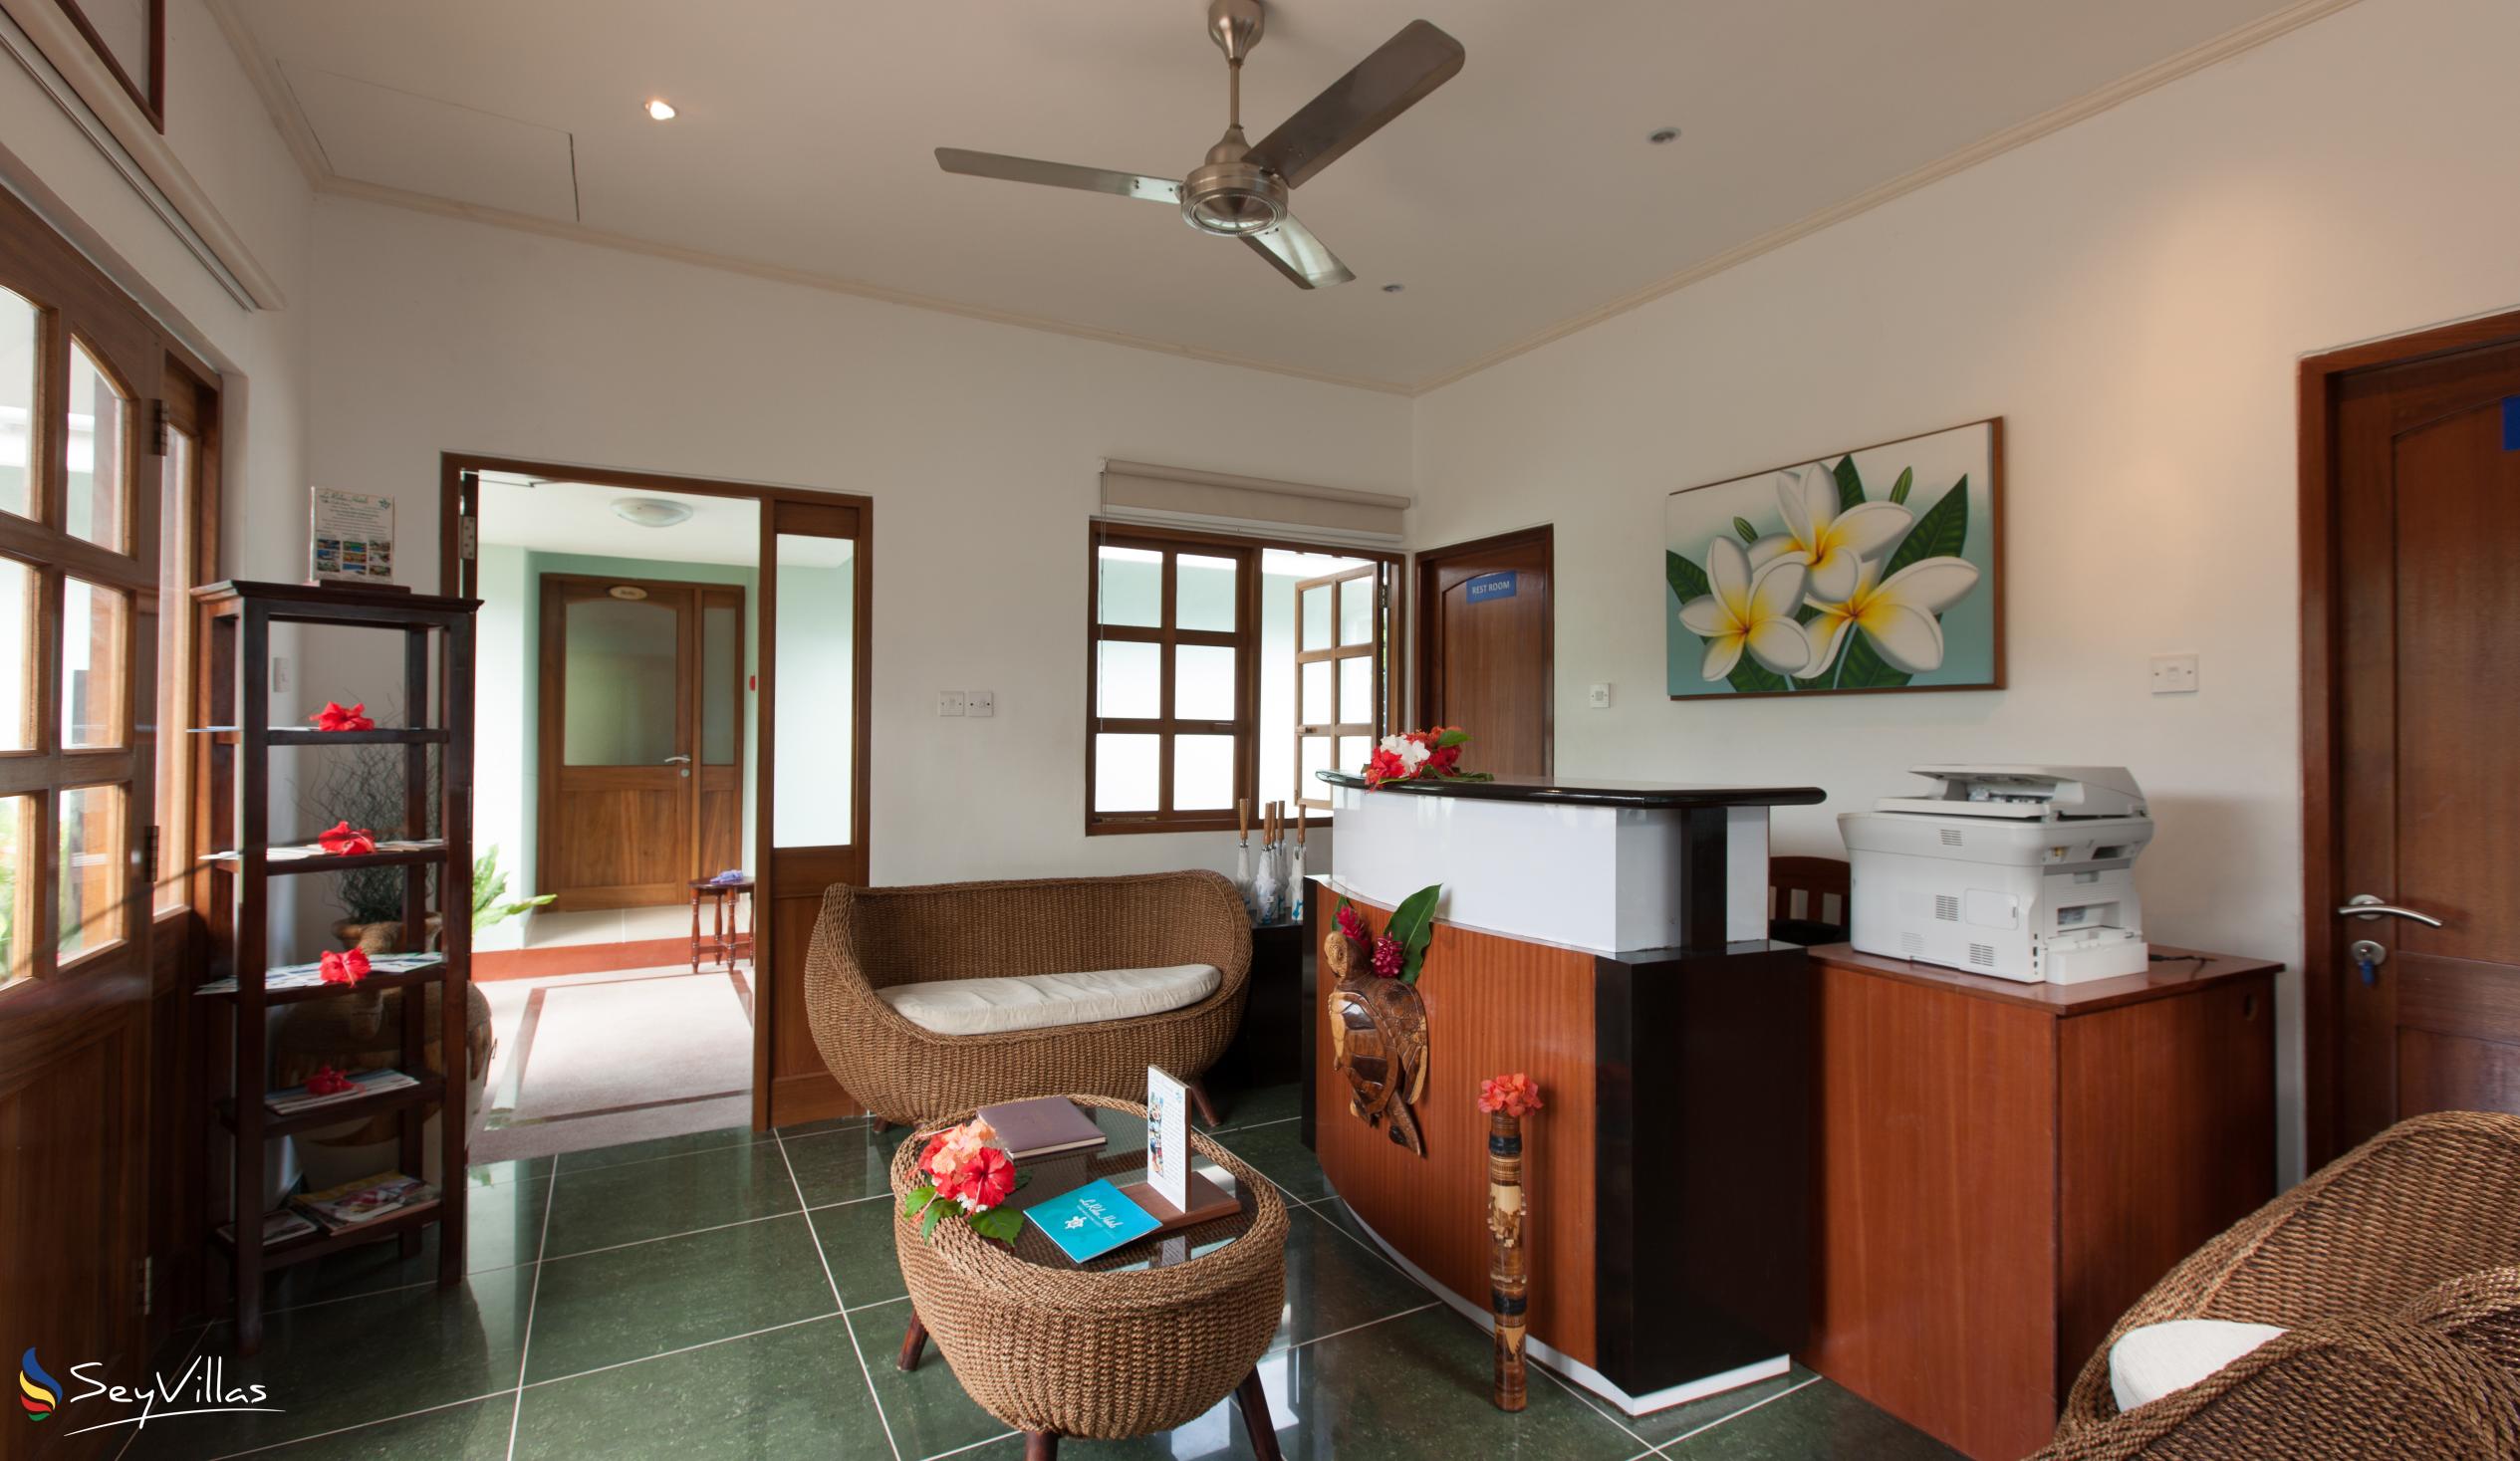 Photo 6: Le Relax Self Catering - Indoor area - La Digue (Seychelles)